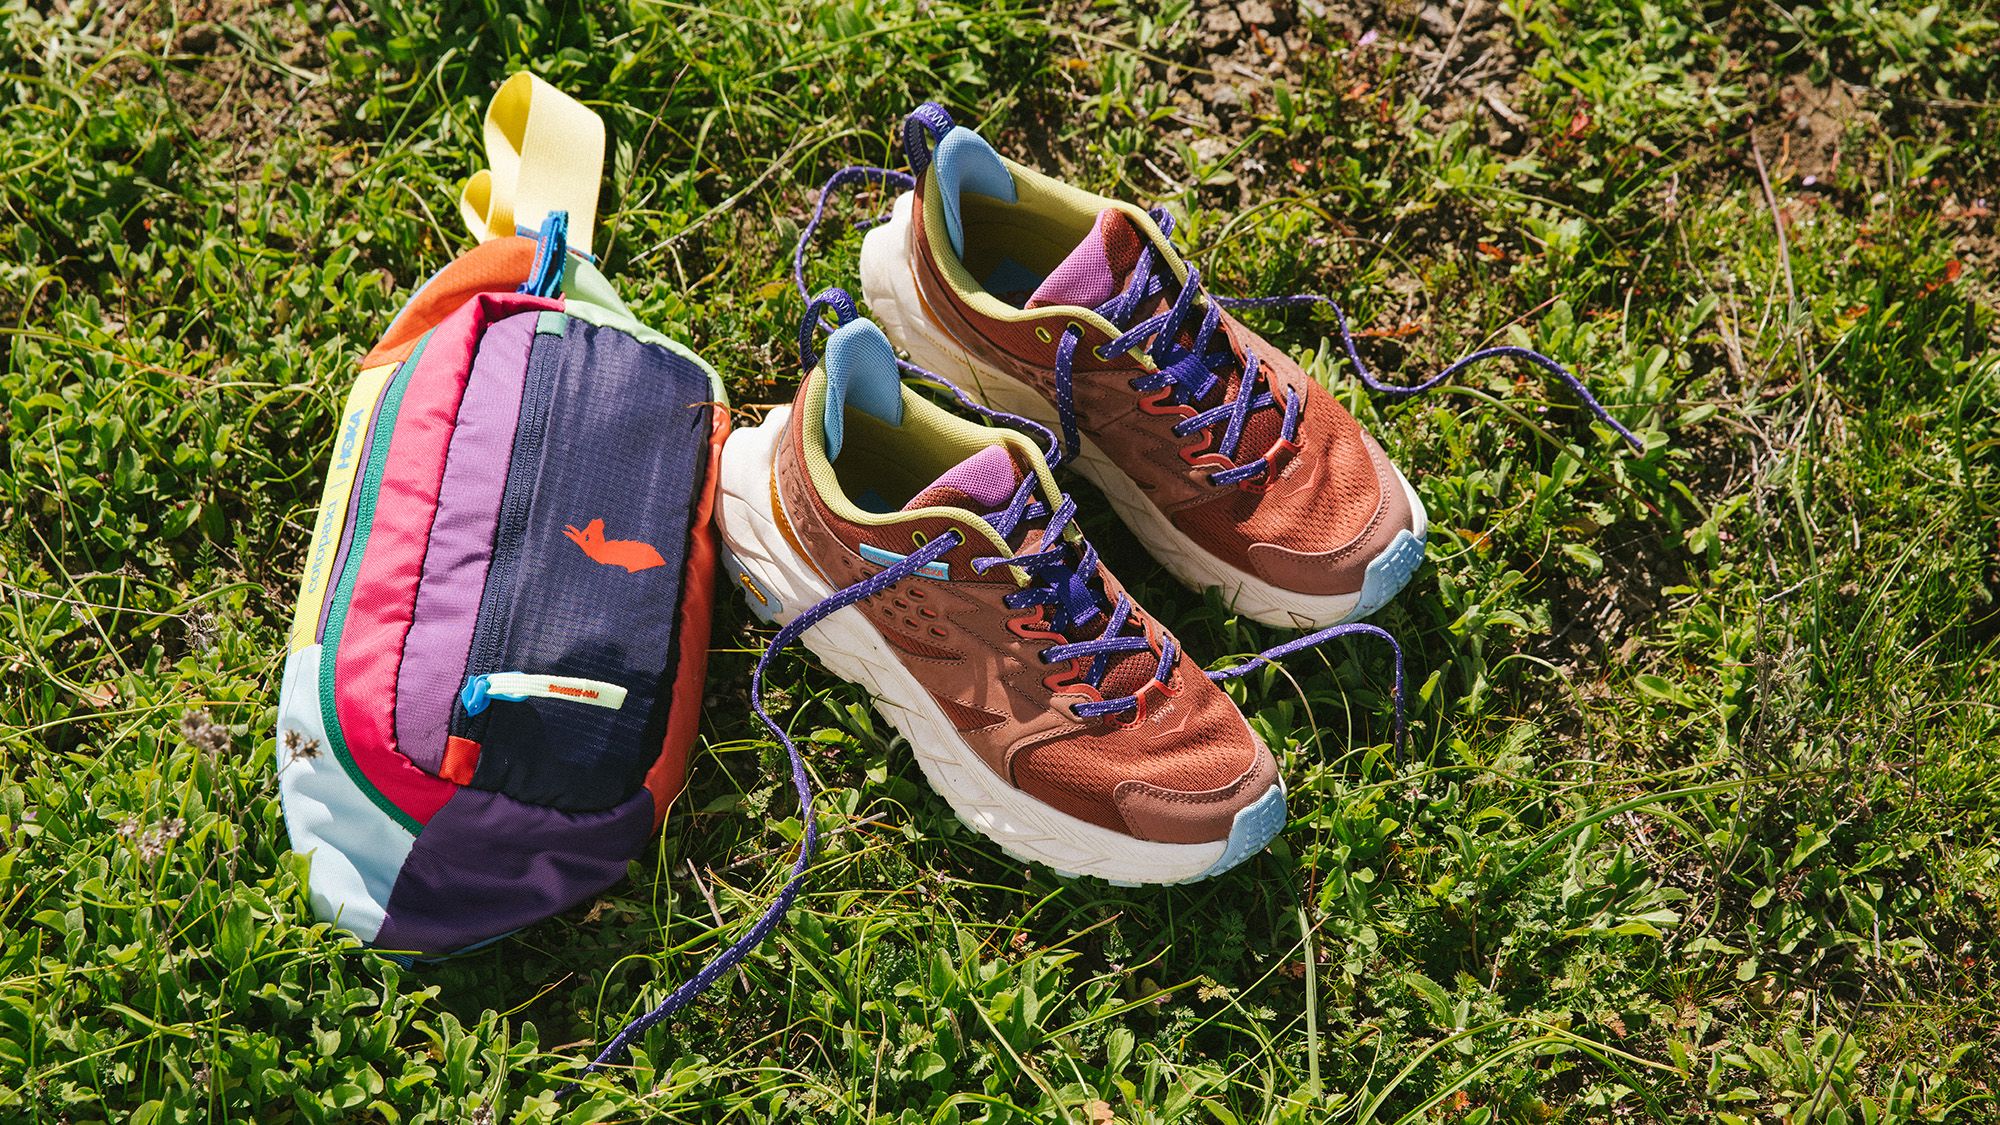 Hoka x Cotopaxi launch new collection